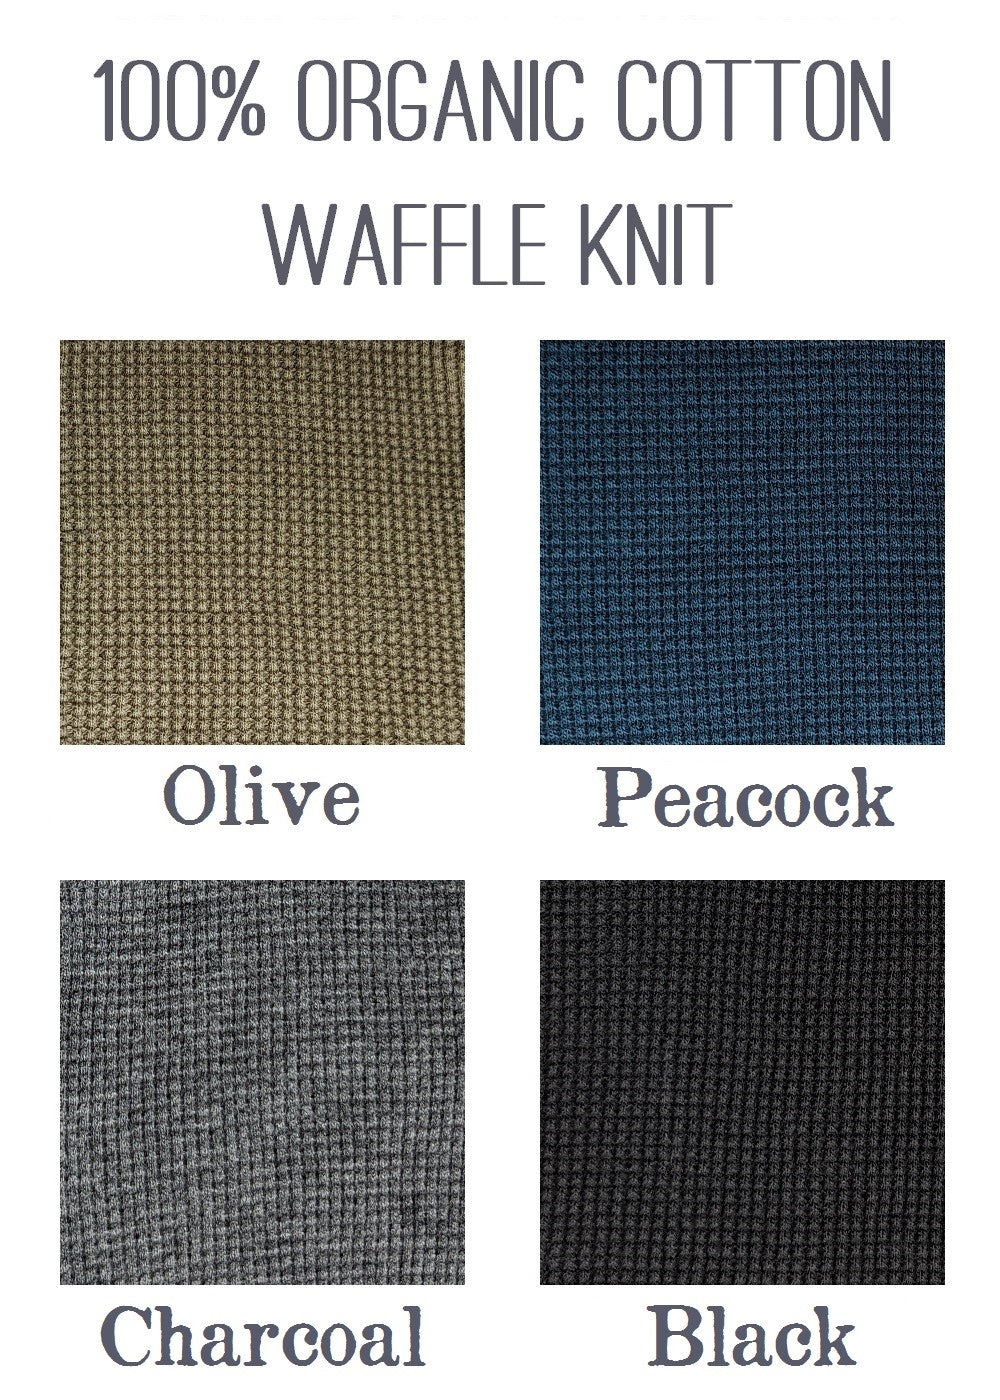 Organic Cotton Waffle Knit Color Samples